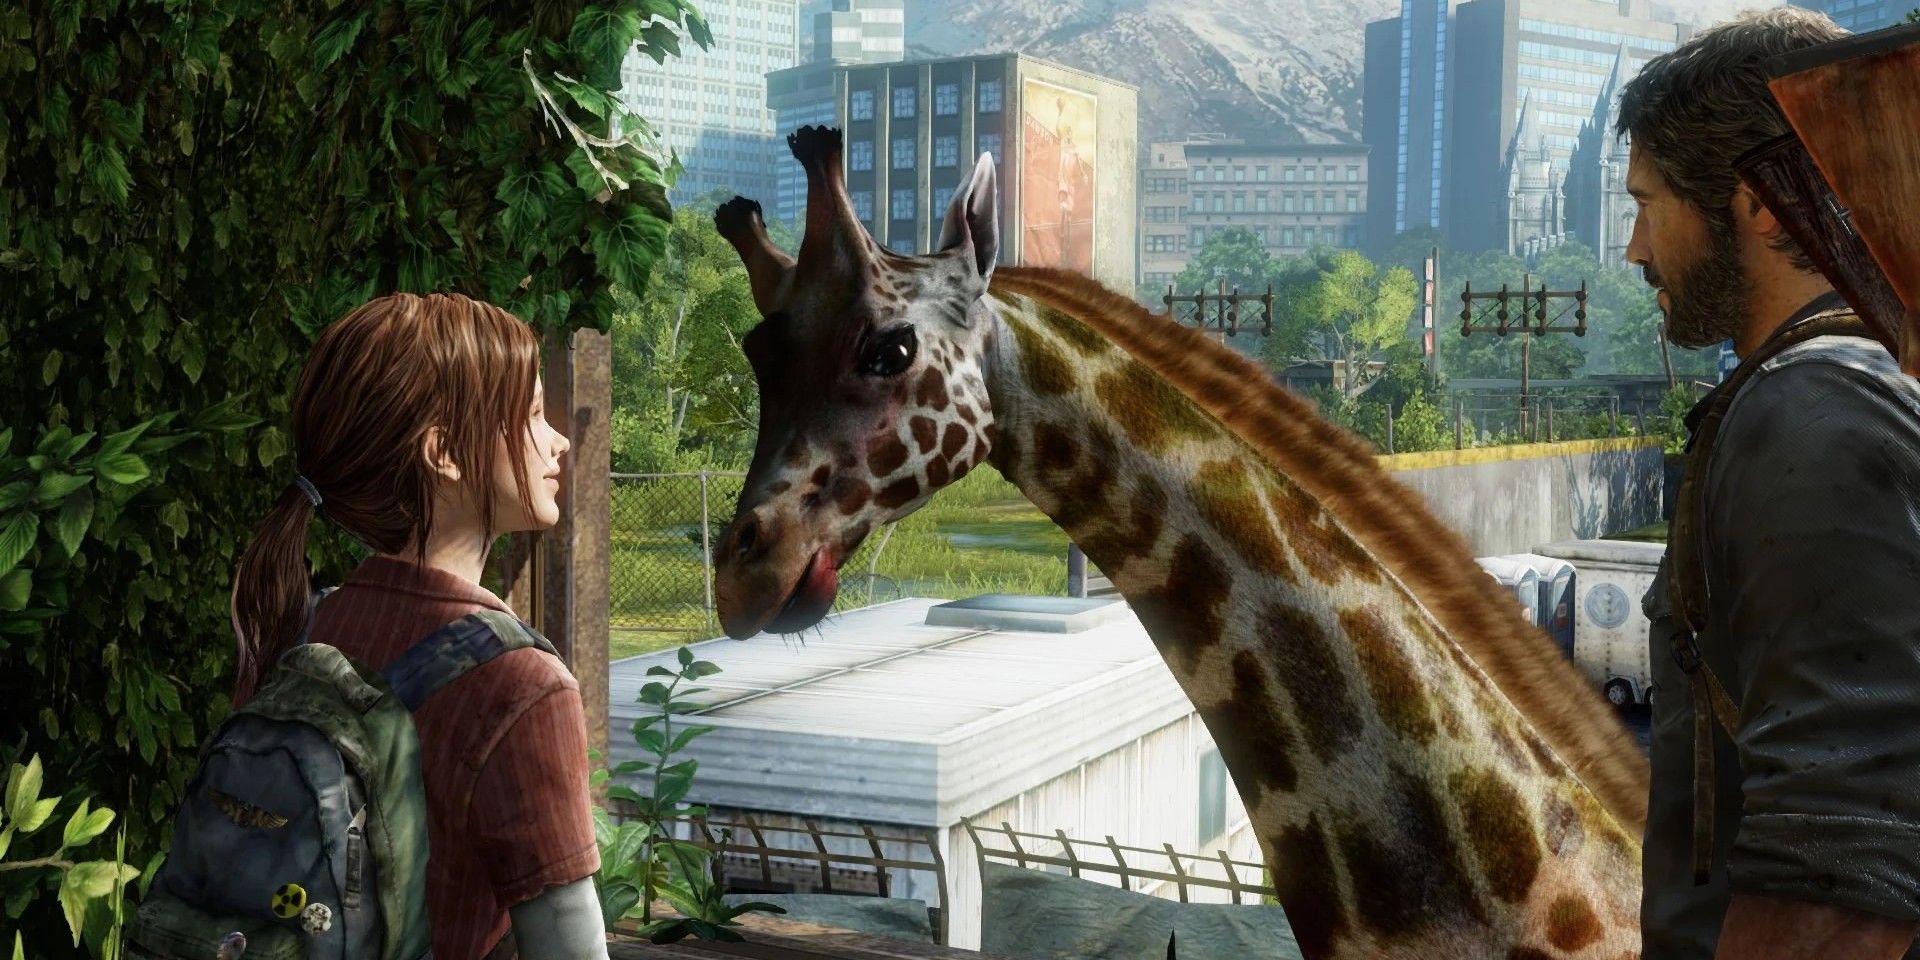 The Last of Us' Ellie, on the left, and Joel, on the right, look at a giraffe, in the middle.